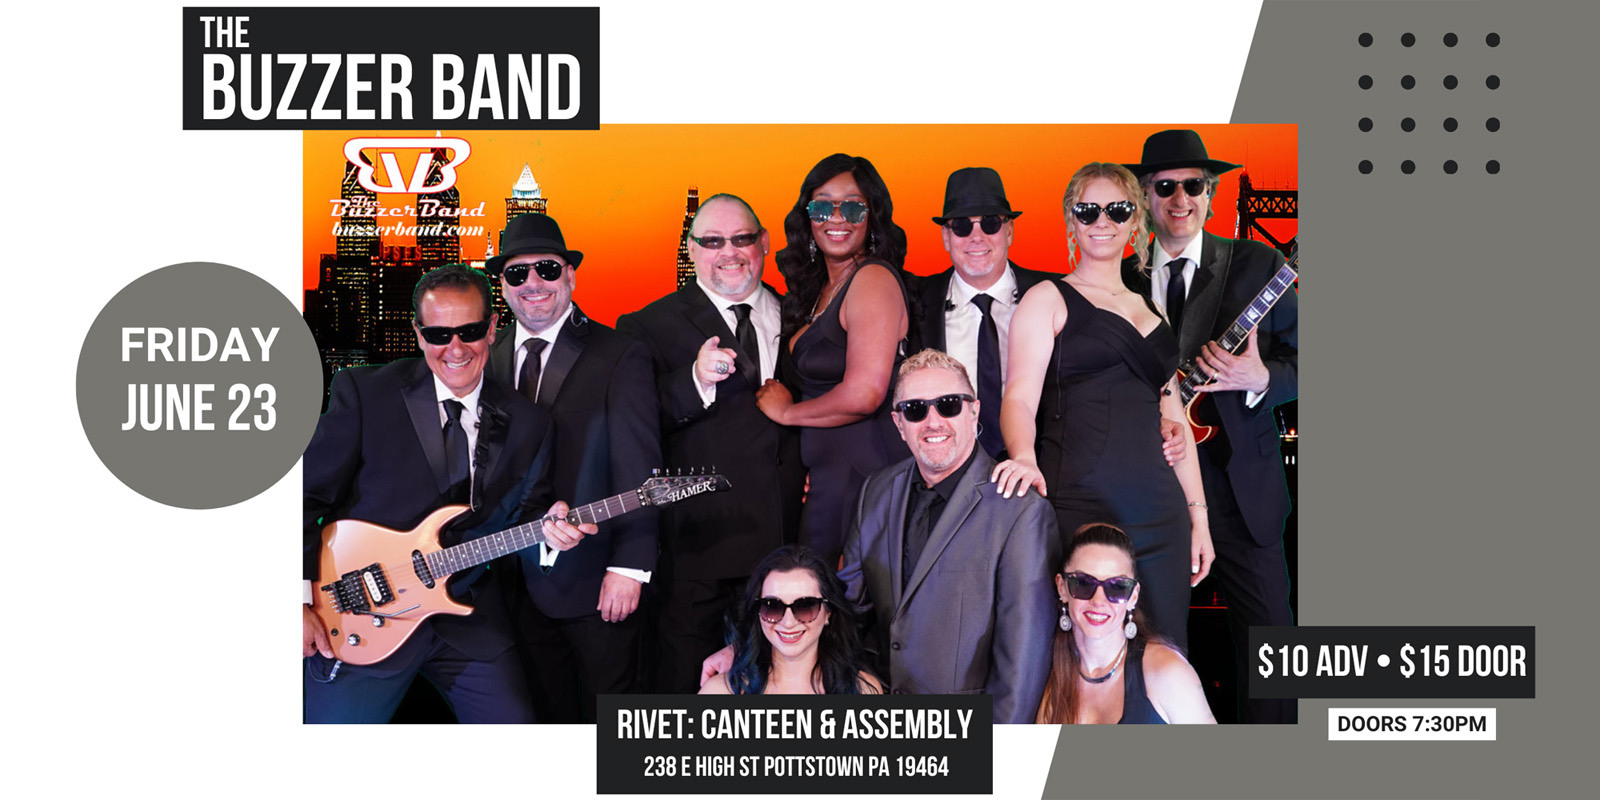 The Buzzer Band performing live at Rivet: Canteen & Assembly on Friday, June 23rd, 2023. Join us!